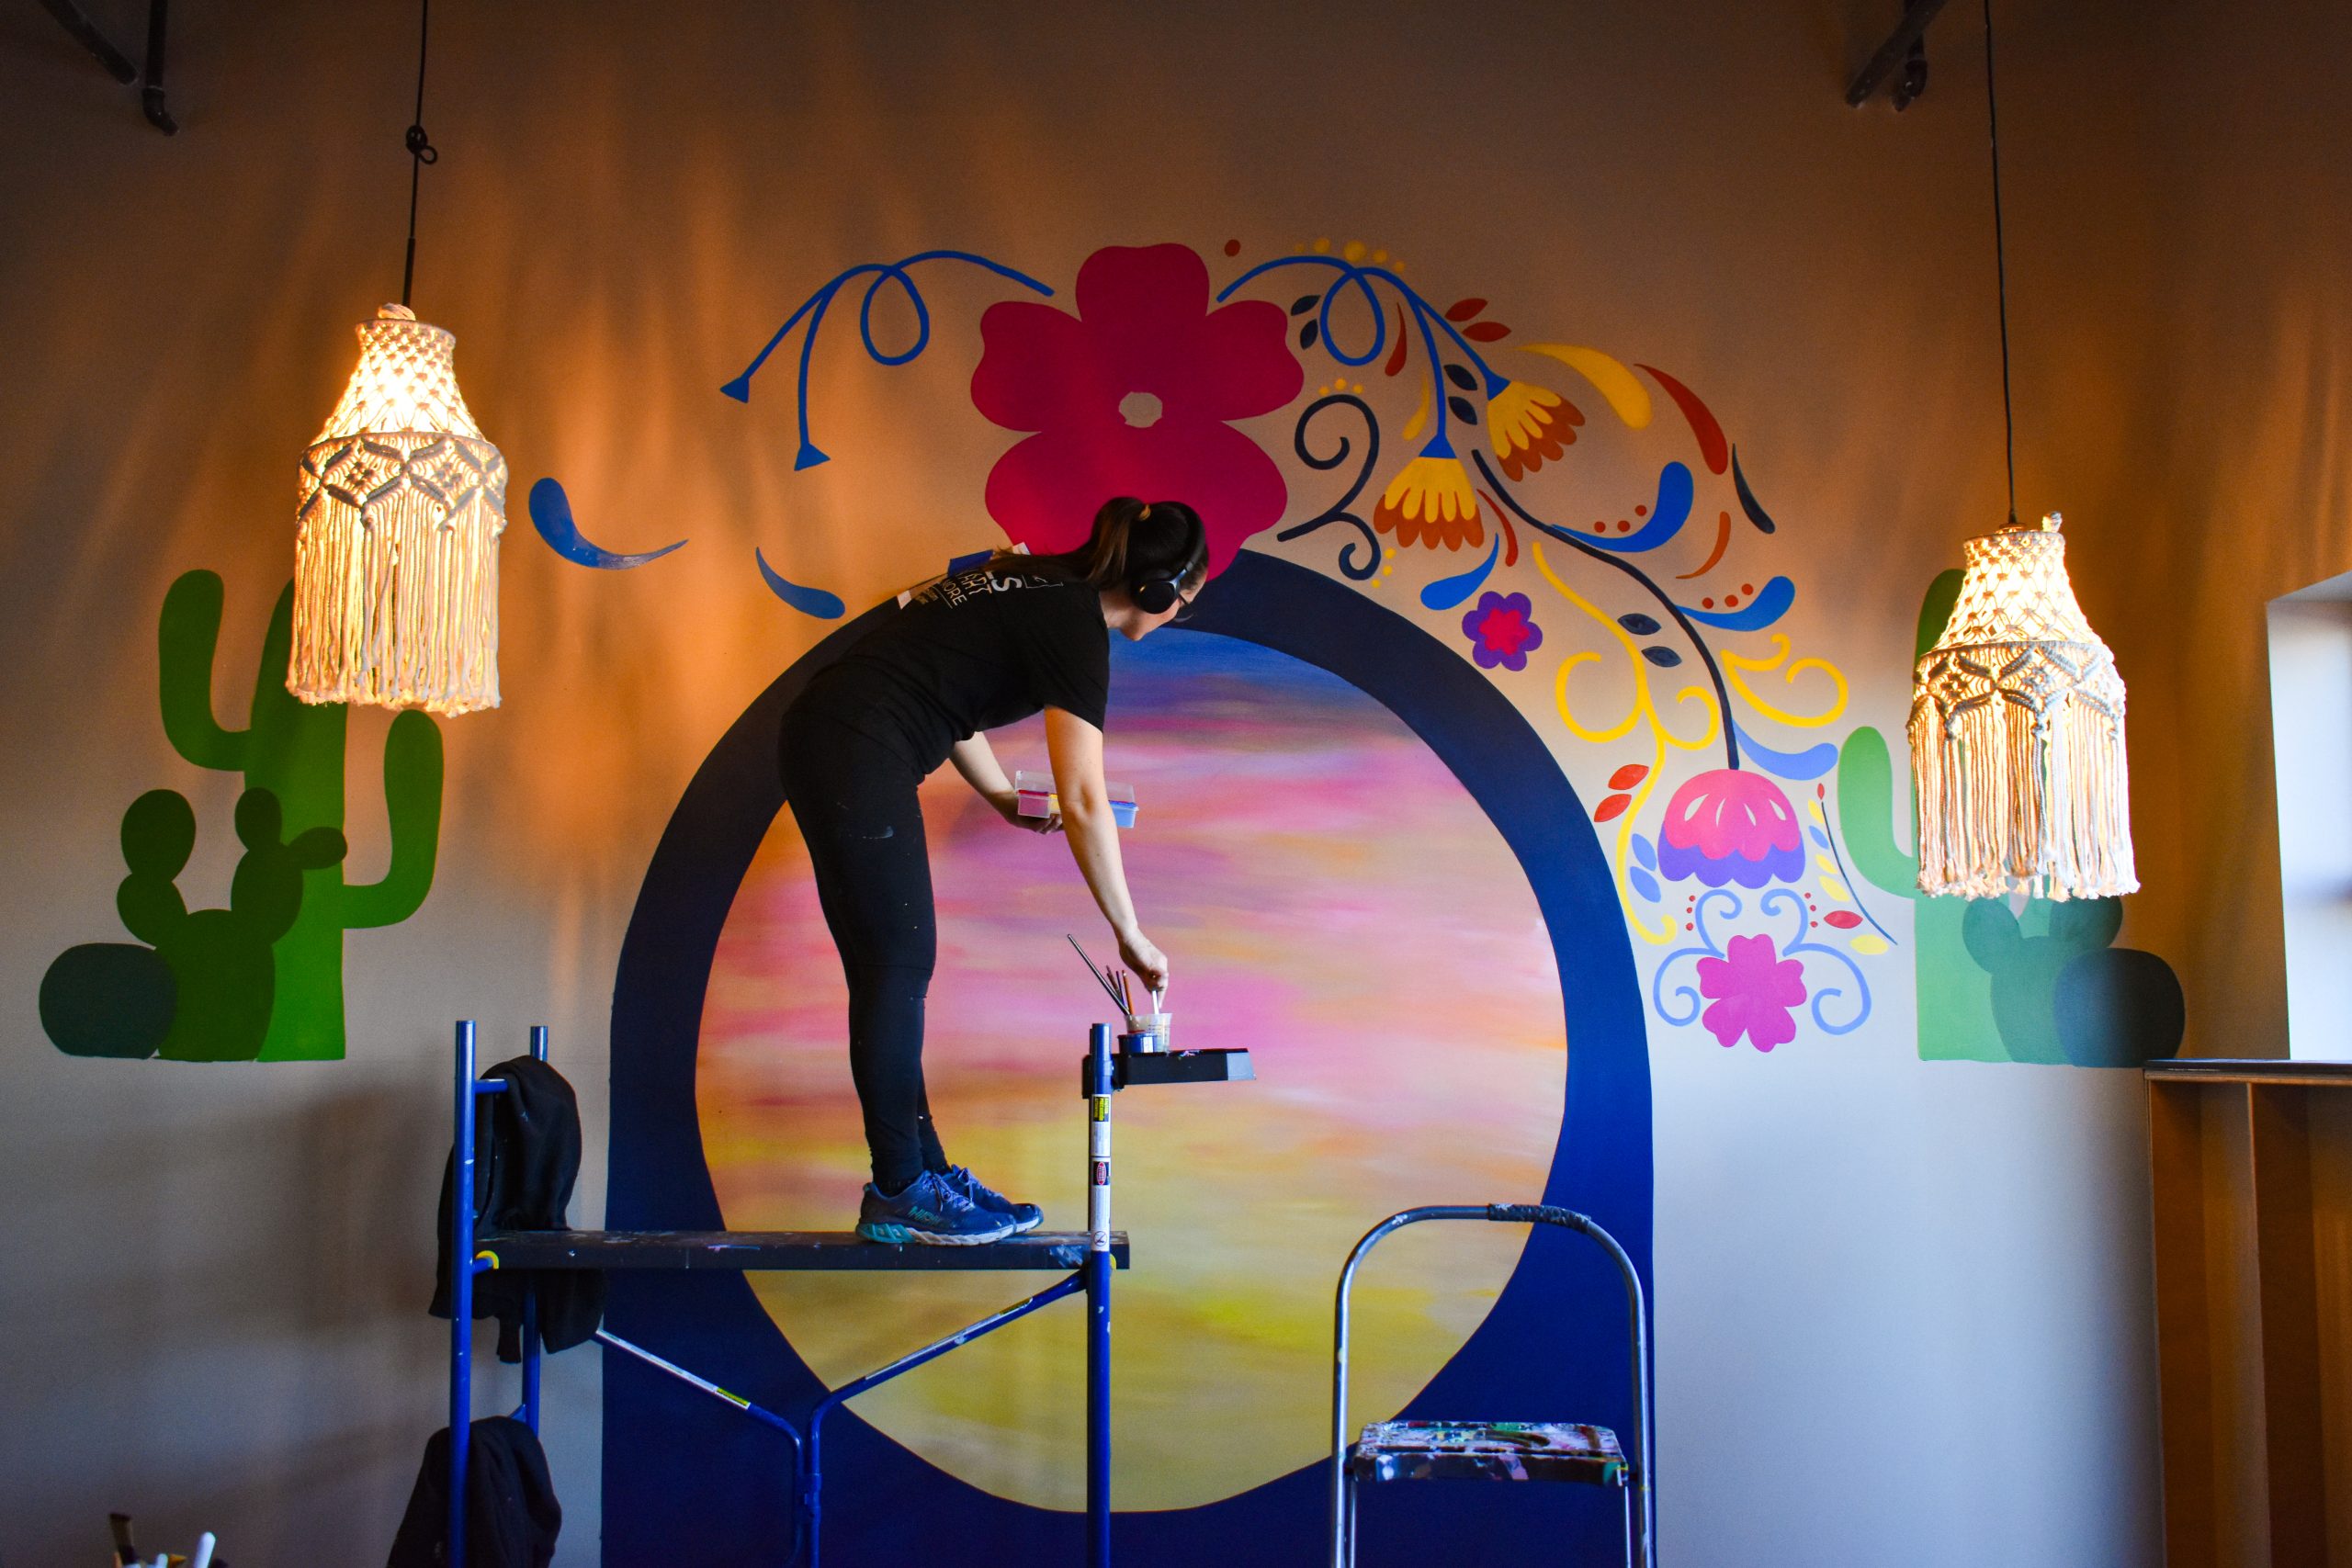 Candice Warby paints a mural at Rio Burritos in Cedar Rapids. Ms. Warby founded her art business, Whimsical Twist, in 2018. CREDIT ALEXANDRA OLSEN